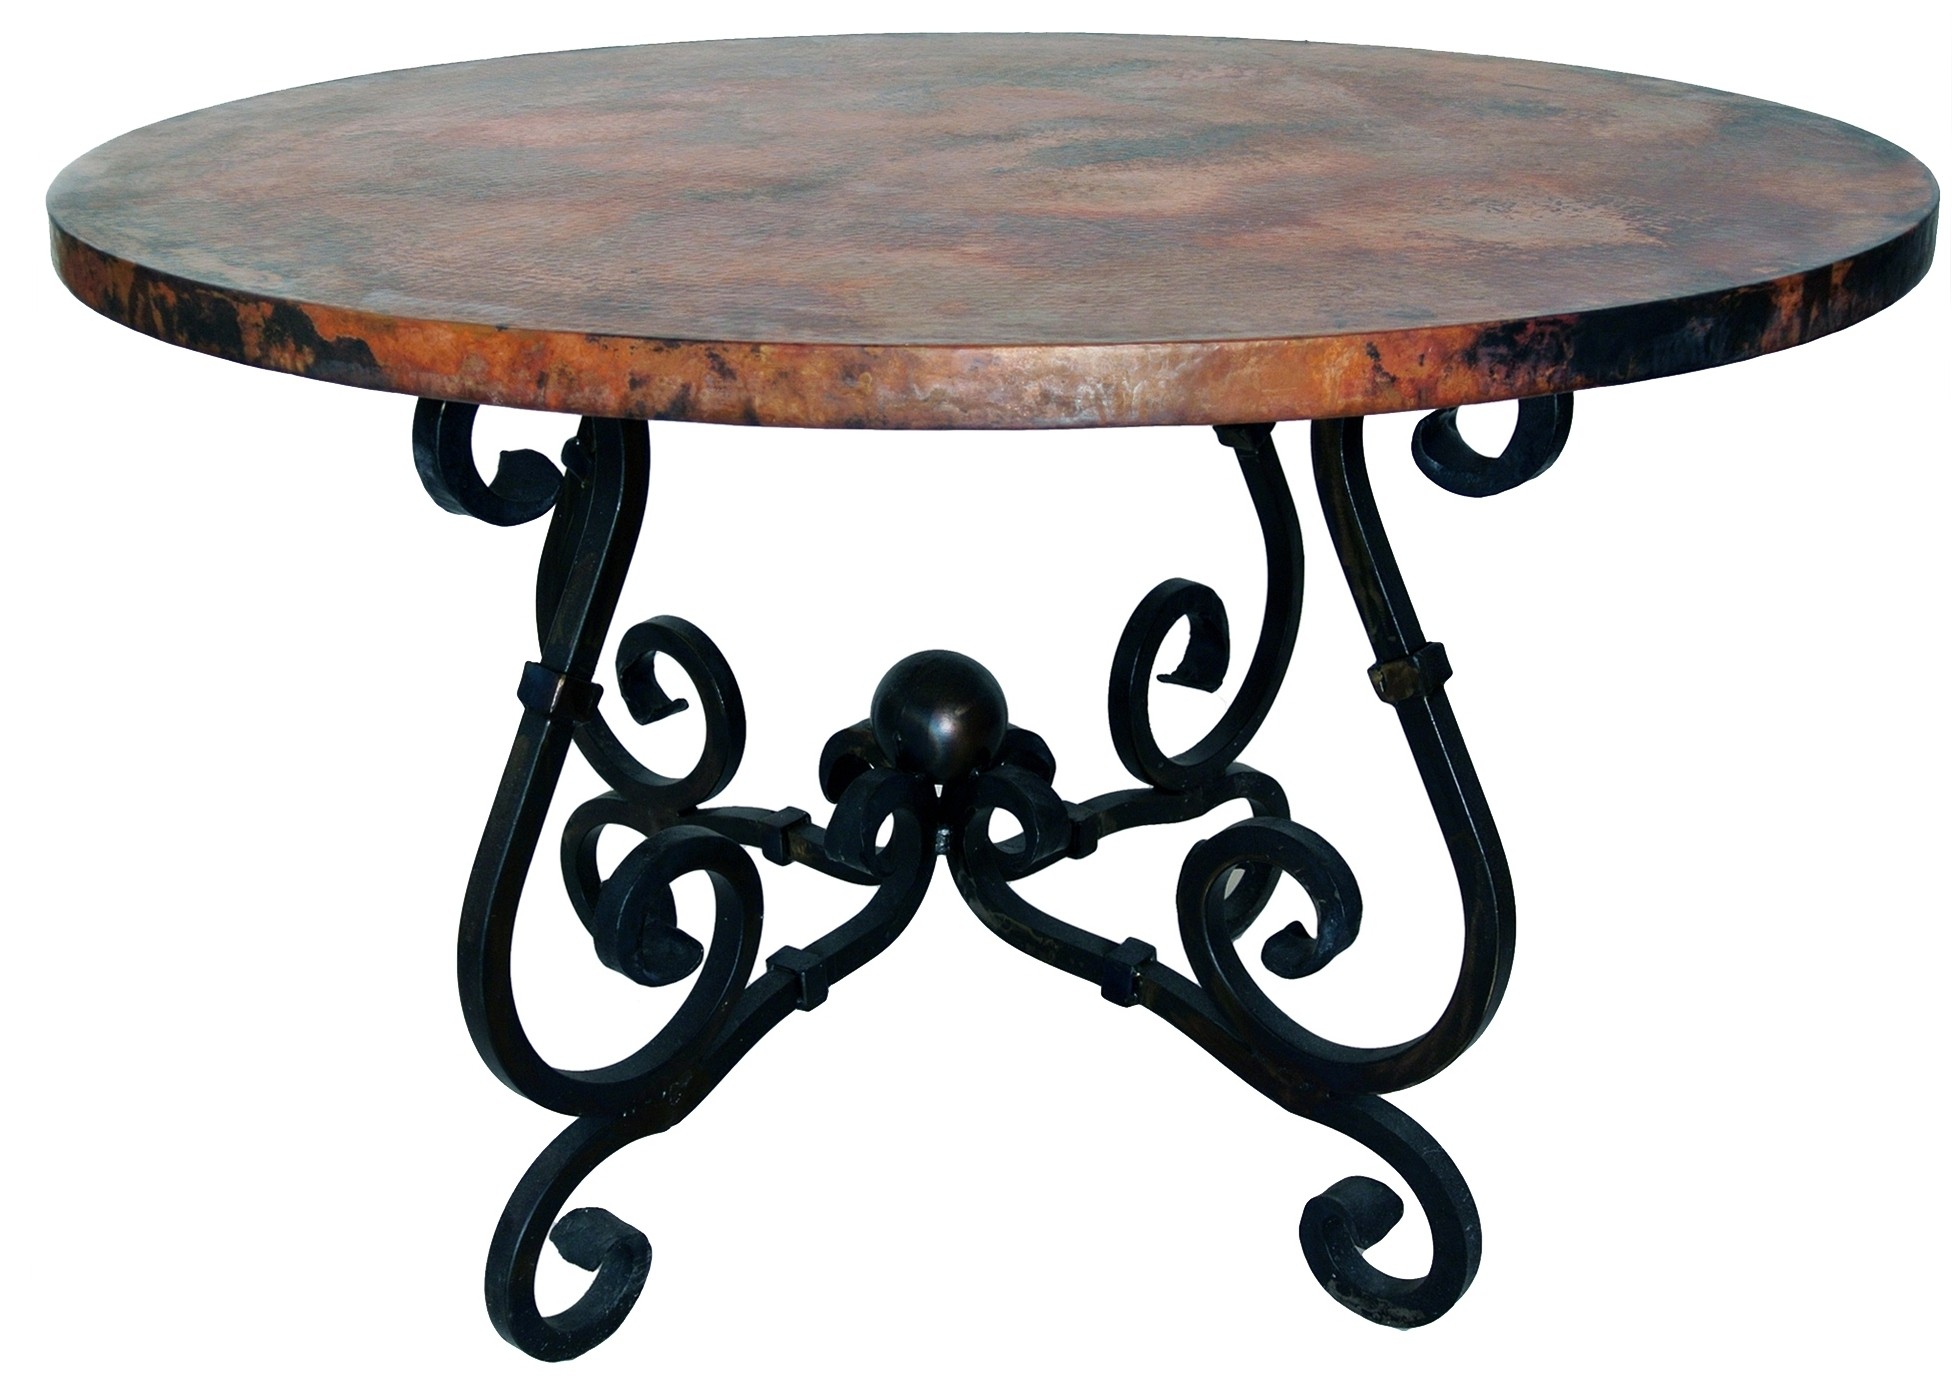 Wrought iron kitchen table and chairs images where to buy